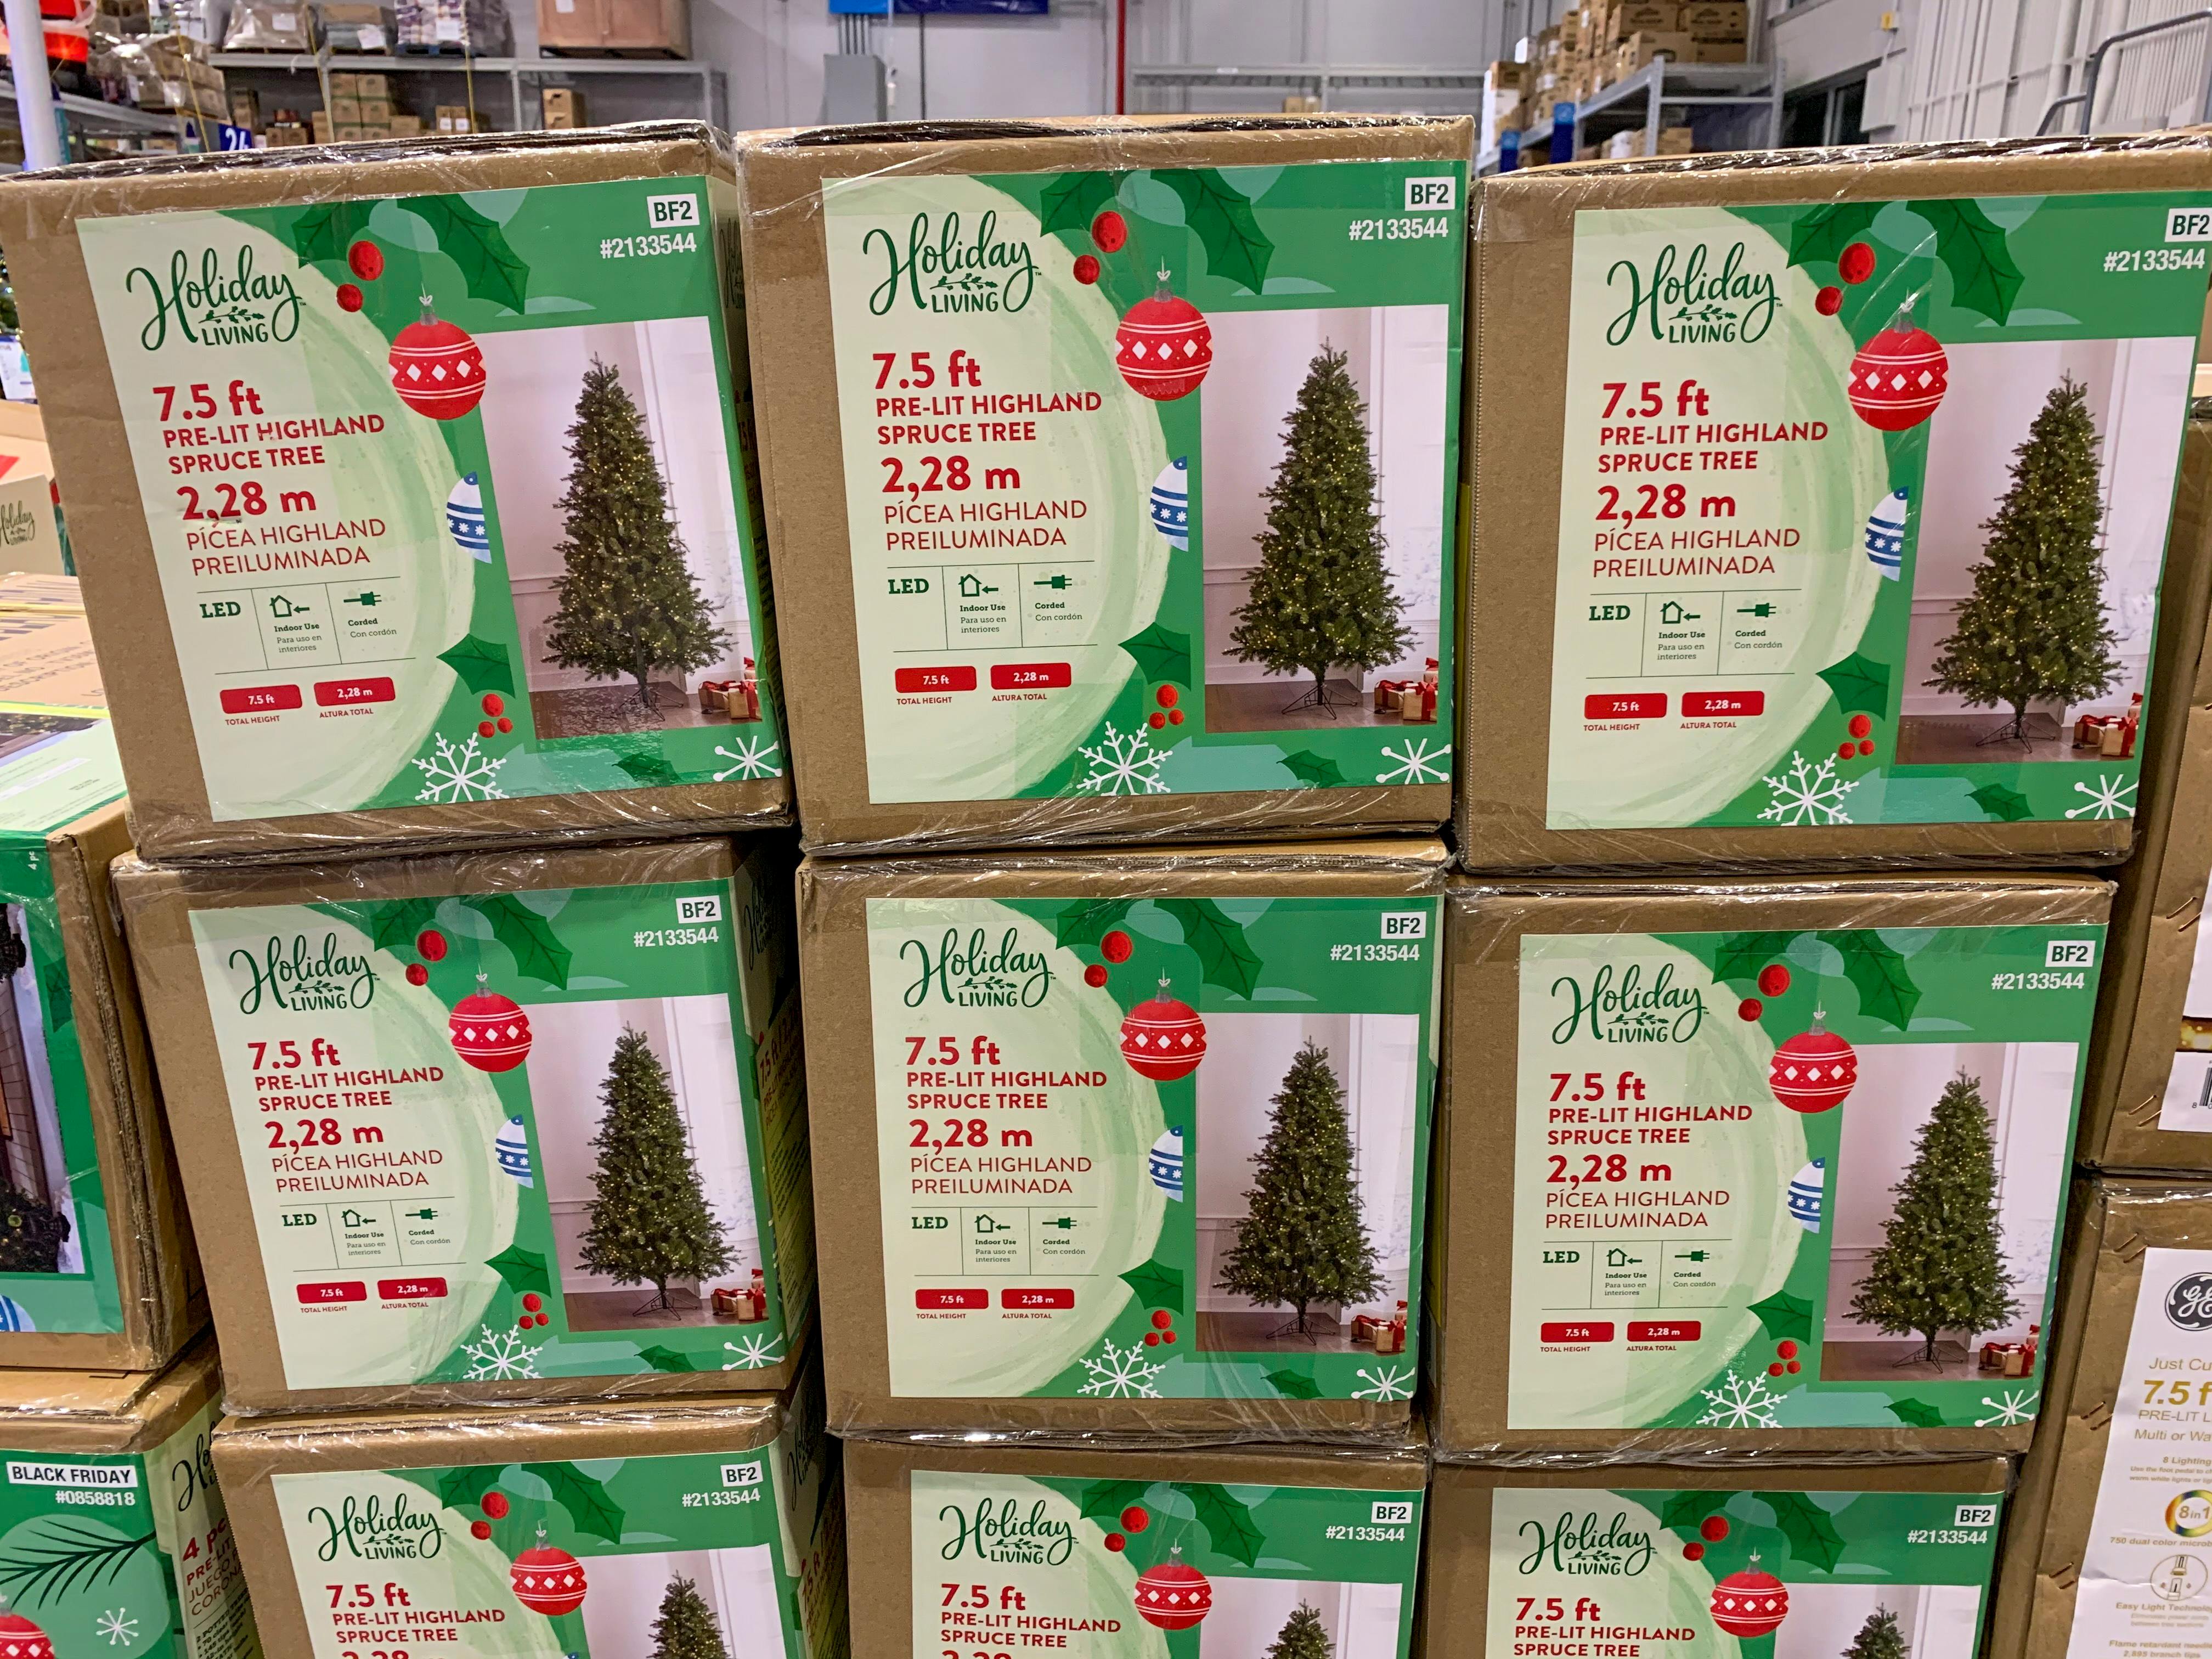 Holiday Living artificial Christmas tree boxes stacked at Lowe's during their Black Friday event.